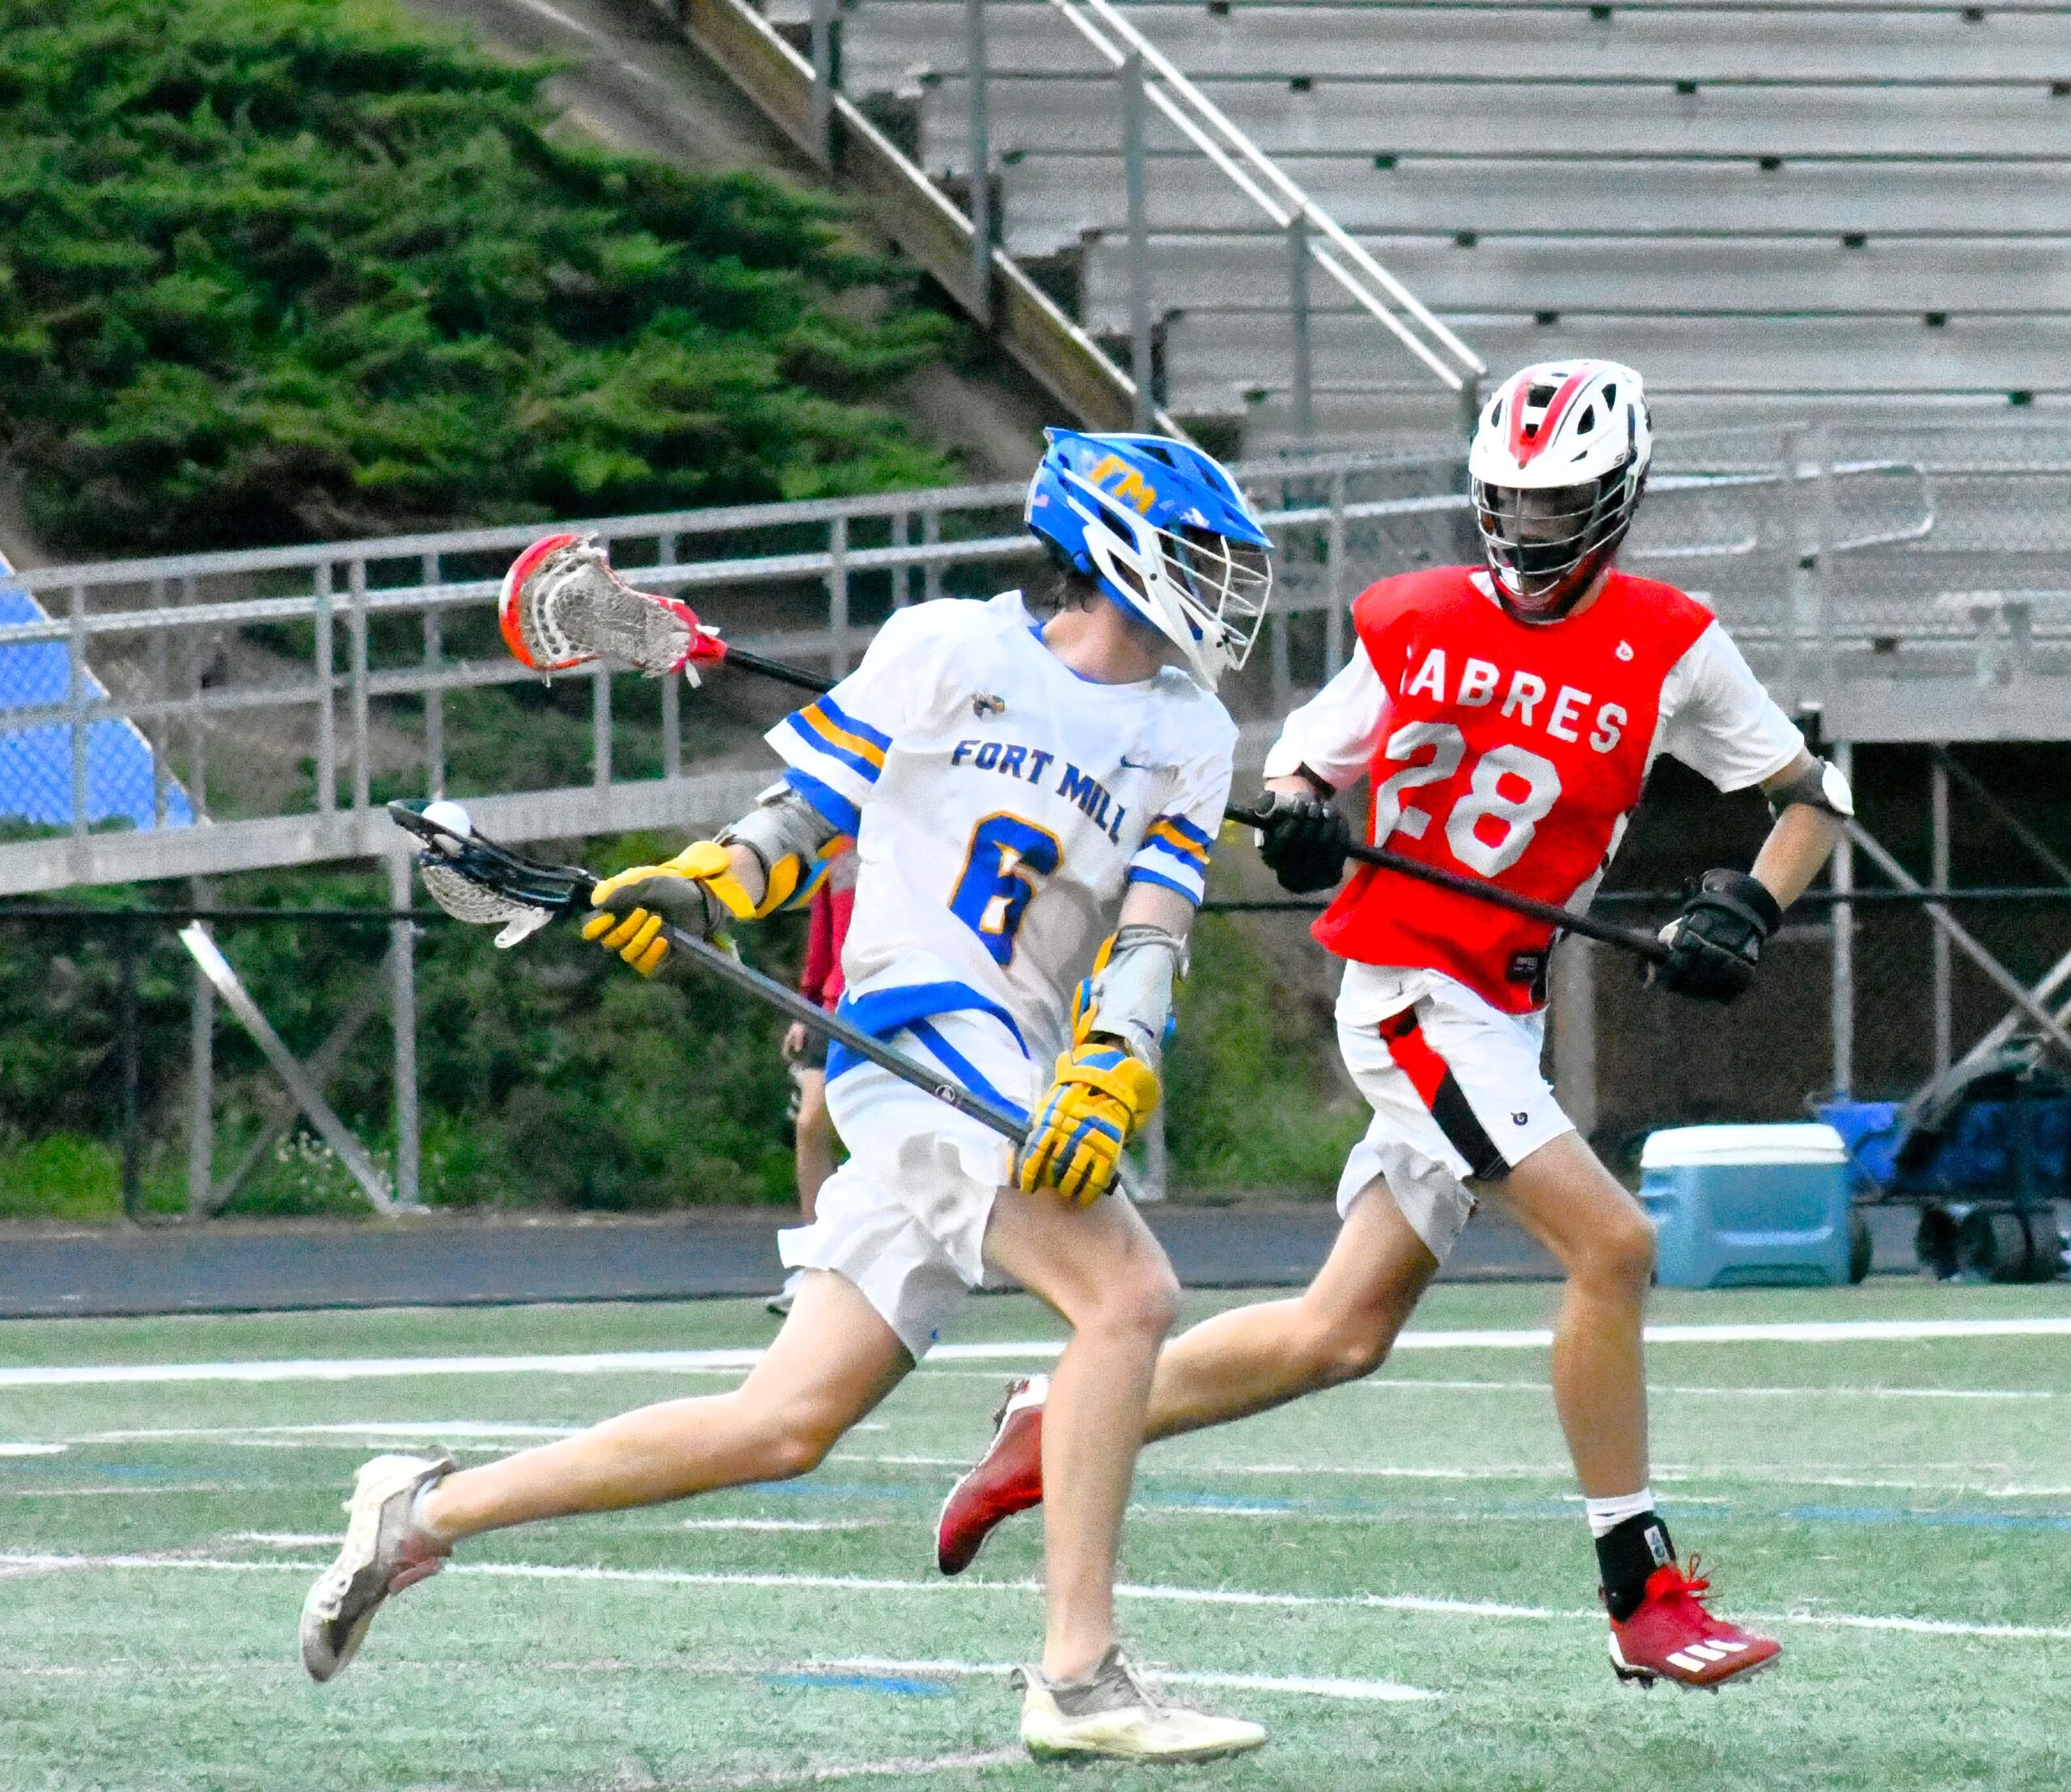 South Meck too much in second half against Jackets (April 11 Roundup)